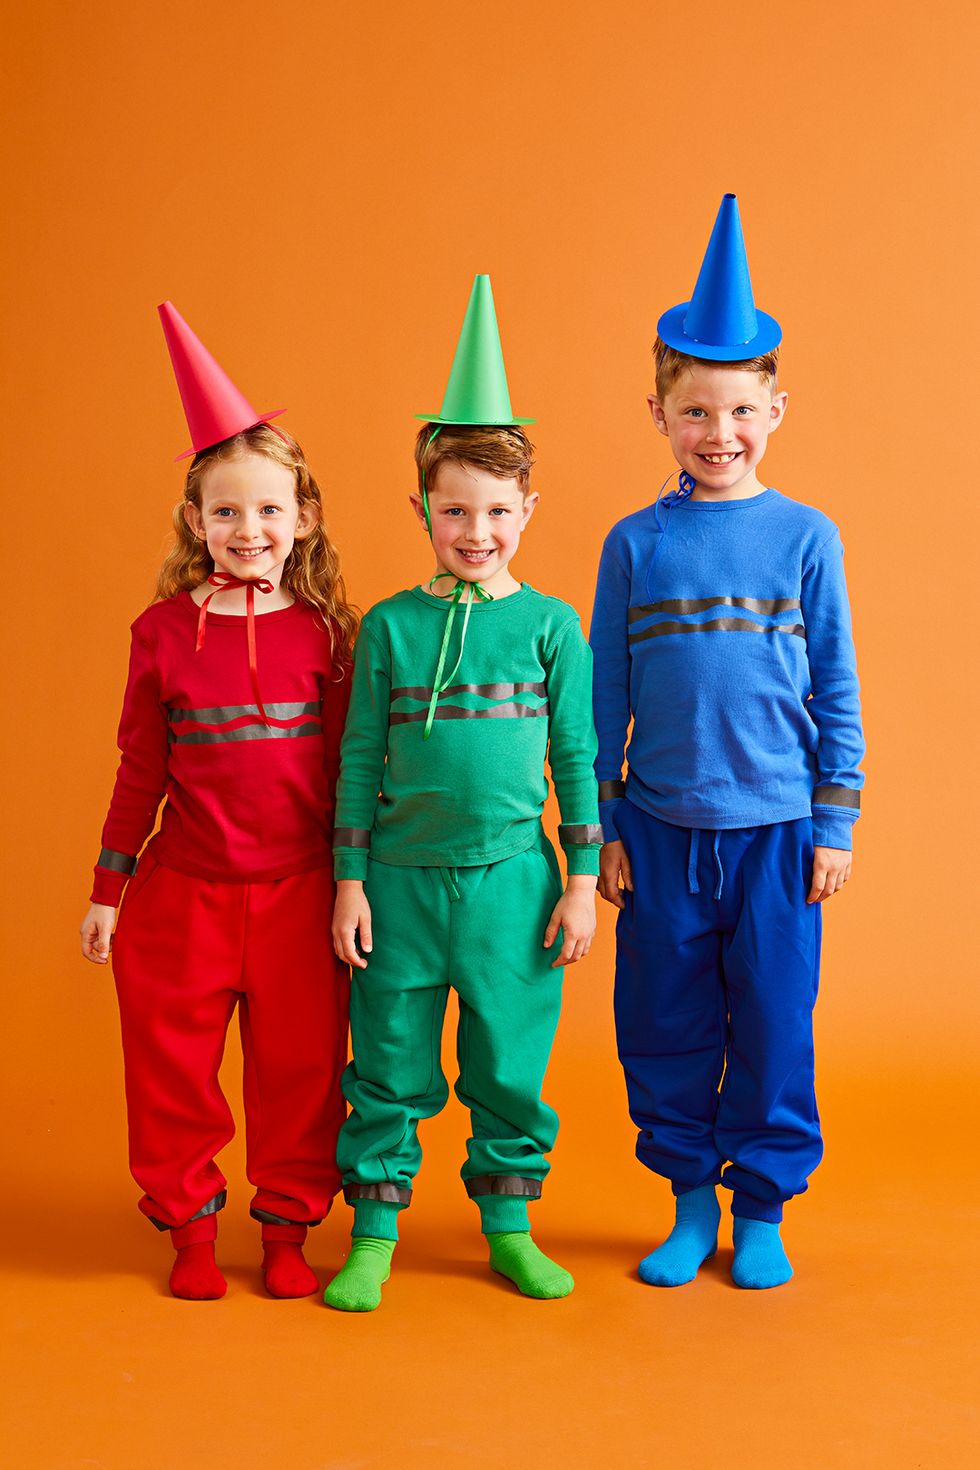 7 DIY Halloween costumes to make with your kids